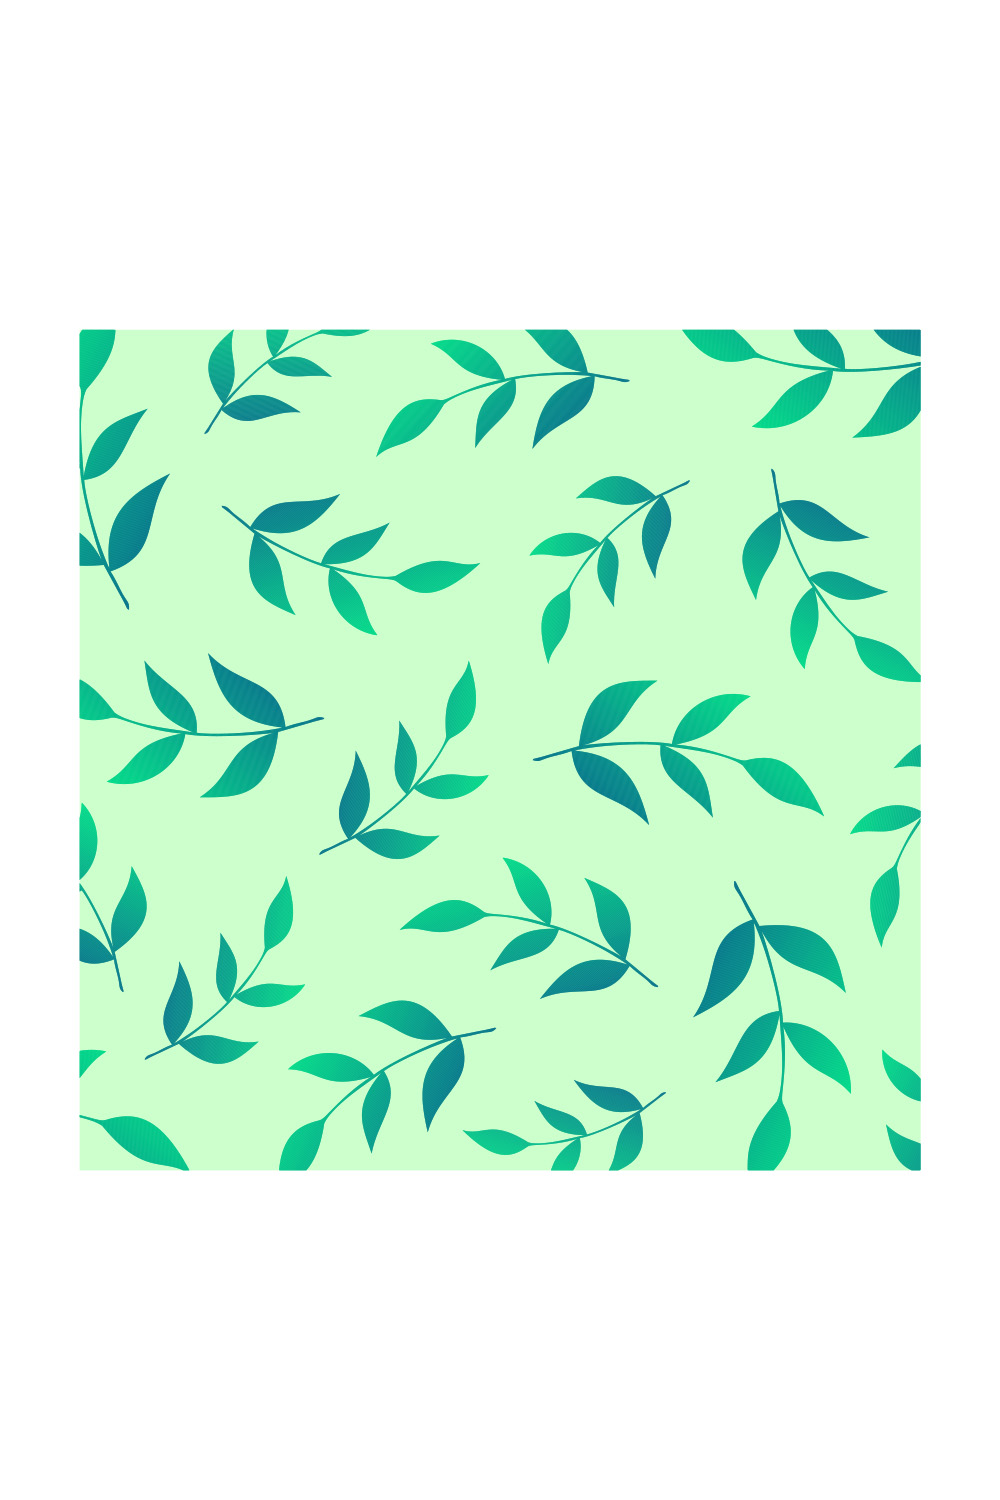 Background of leafy twigs pinterest preview image.